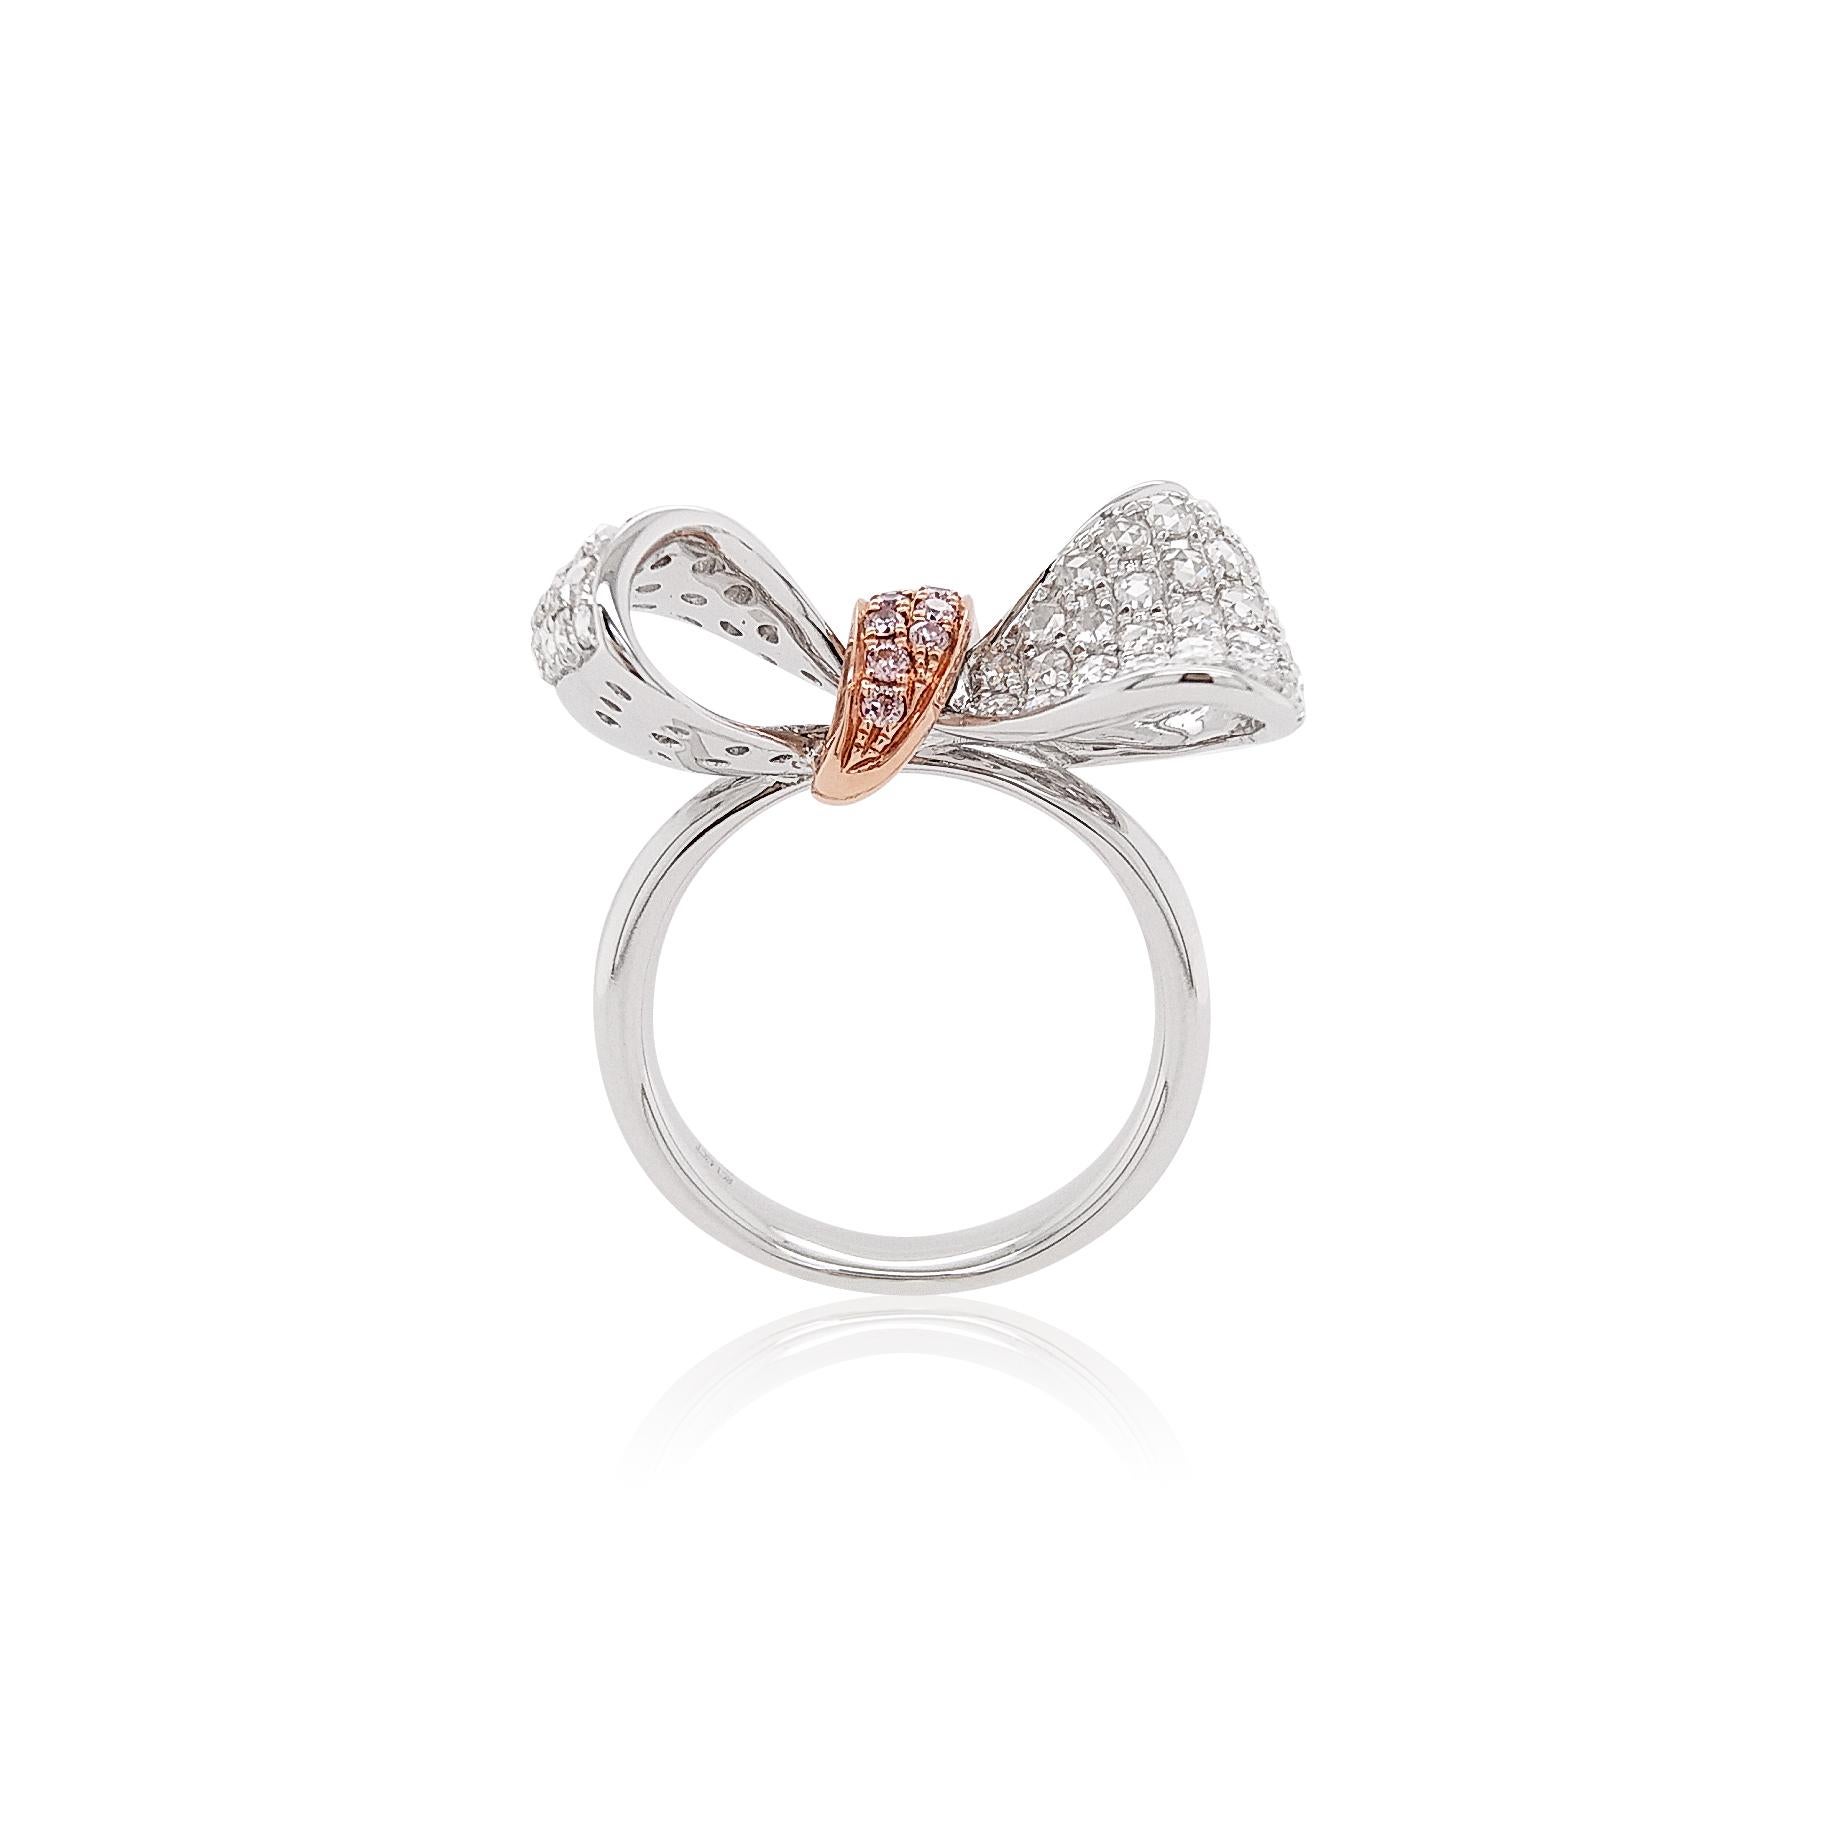 Contemporary Natural Rose-Cut White Diamond and Pink Diamond Ring in 18K White and Pink Gold